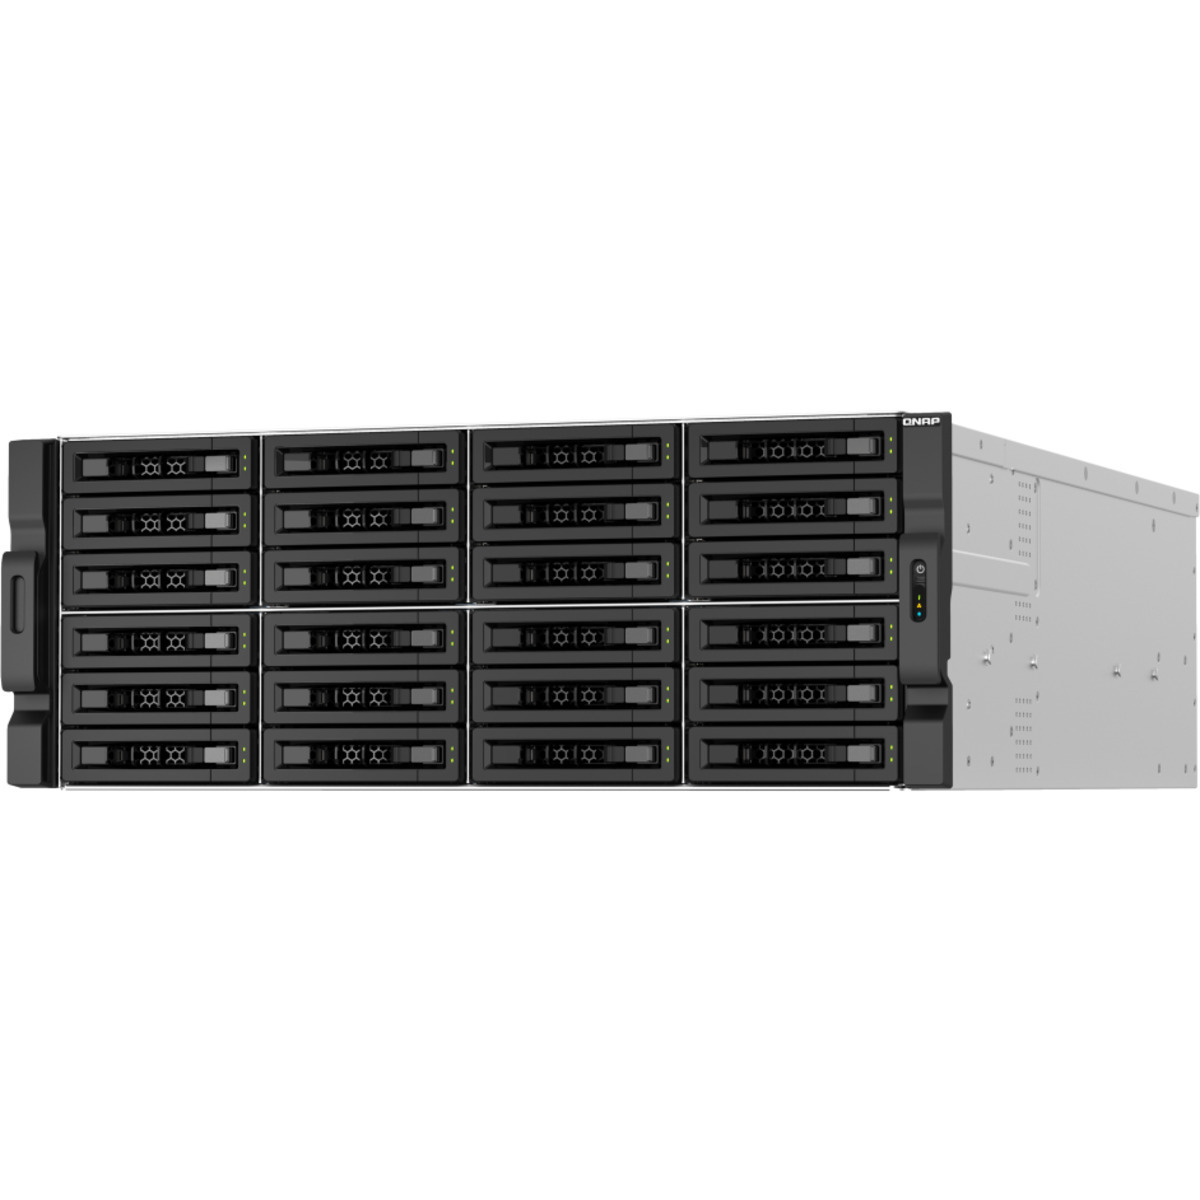 buy QNAP TS-h3087XU-RP E-2378 QuTS hero Edition 528tb RackMount NAS - Network Attached Storage Device 24x22000gb Seagate IronWolf Pro ST22000NT001 3.5 7200rpm SATA 6Gb/s HDD NAS Class Drives Installed - Burn-In Tested - nas headquarters buy network attached storage server device das new raid-5 free shipping simply usa TS-h3087XU-RP E-2378 QuTS hero Edition